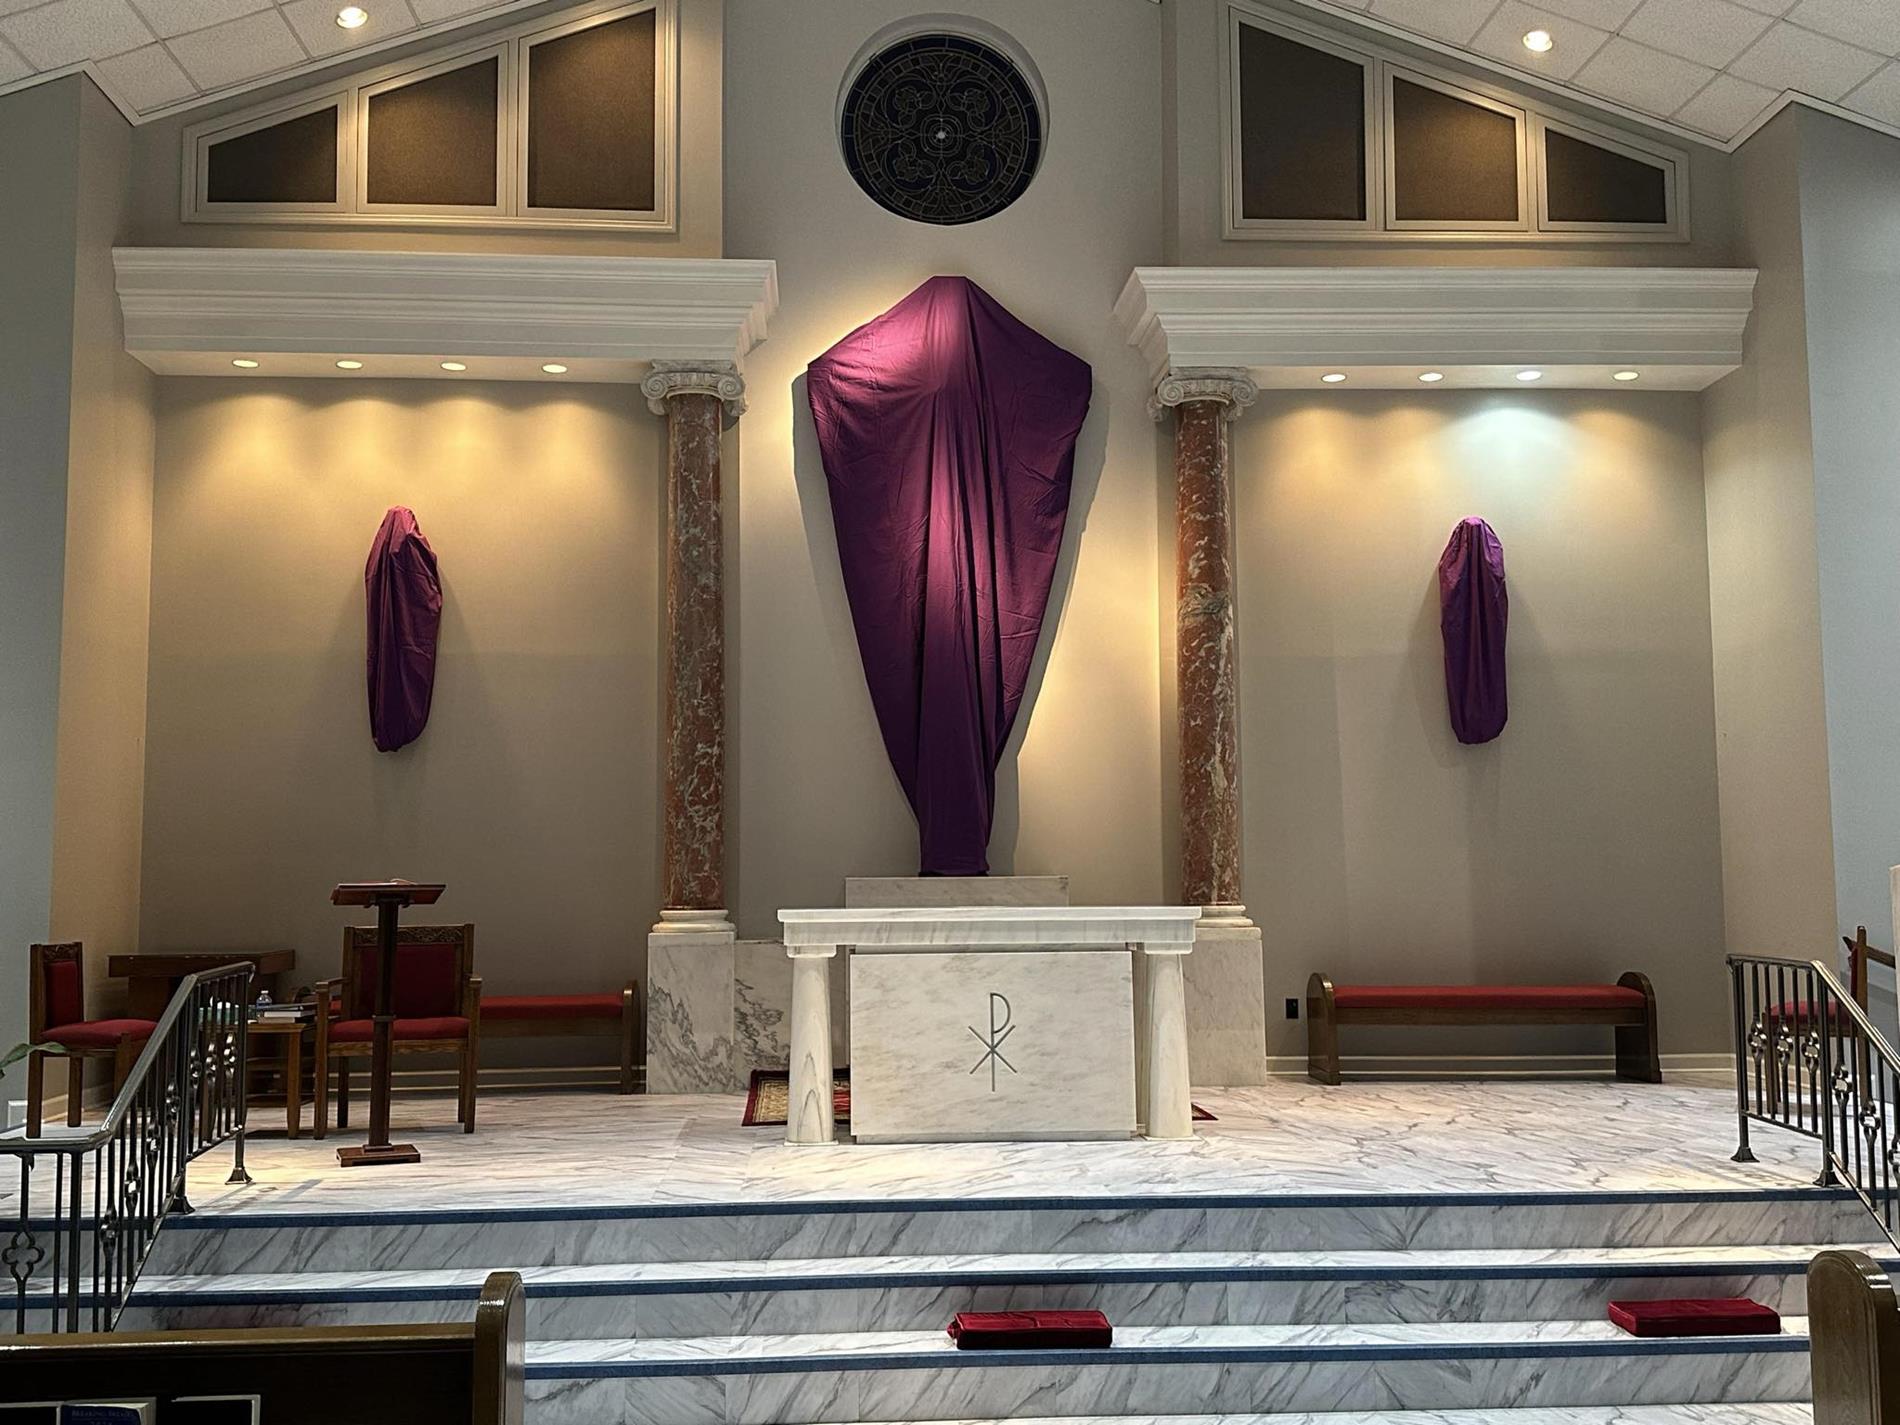 The sanctuary is prepared for Good Friday